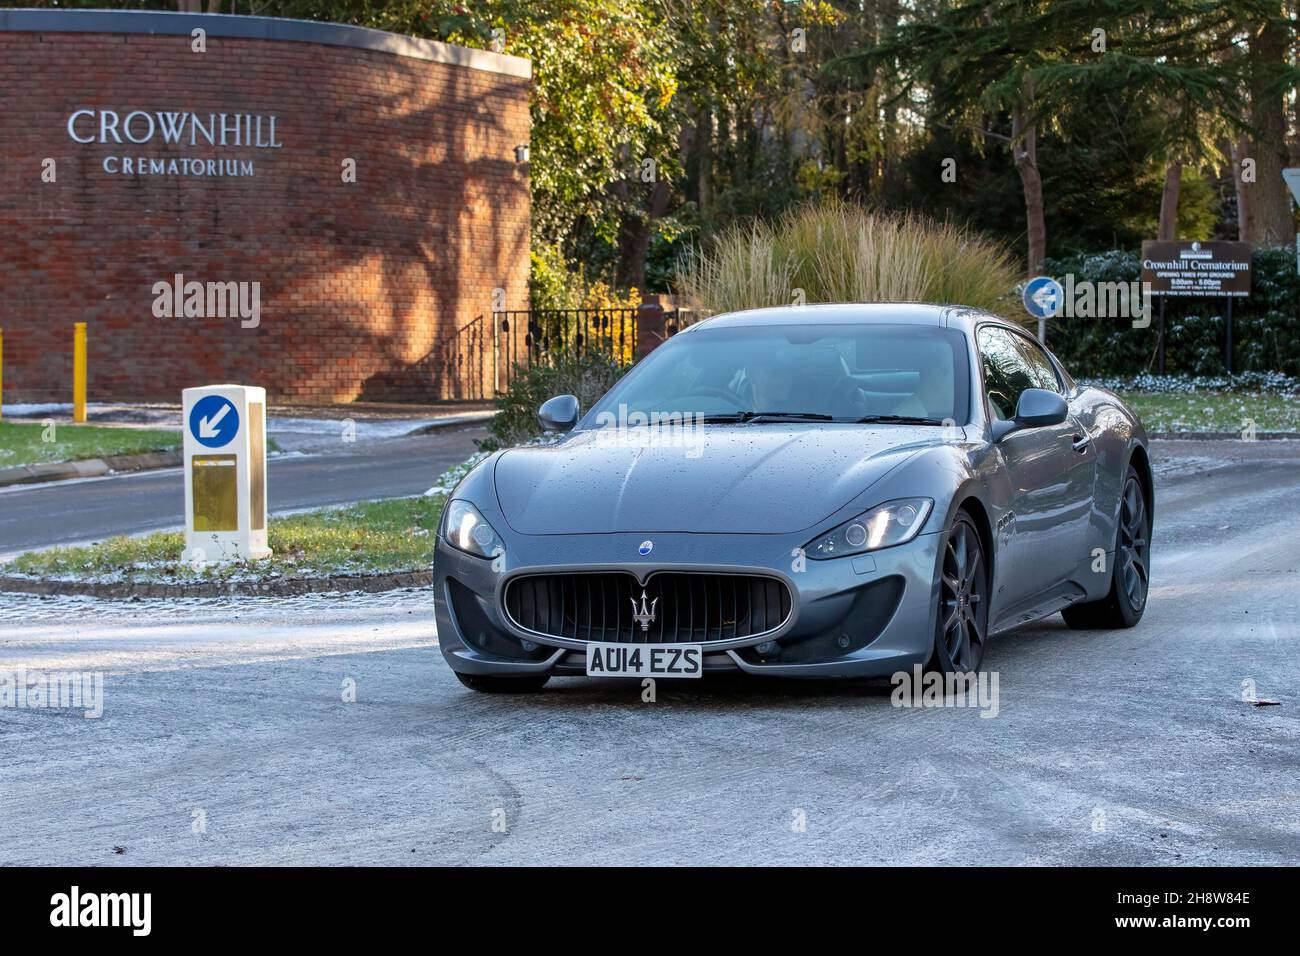 Milton Keynes,UK 2nd Dec 2021.2014 Maserati supercar. Answering a last minute social media request from family, local car enthusiasts brought out their classic cars and supercars for the funeral of fellow car lover Roger Coulson who died recently aged 73. Credit: Sue Thatcher/Alamy Live News Stock Photo